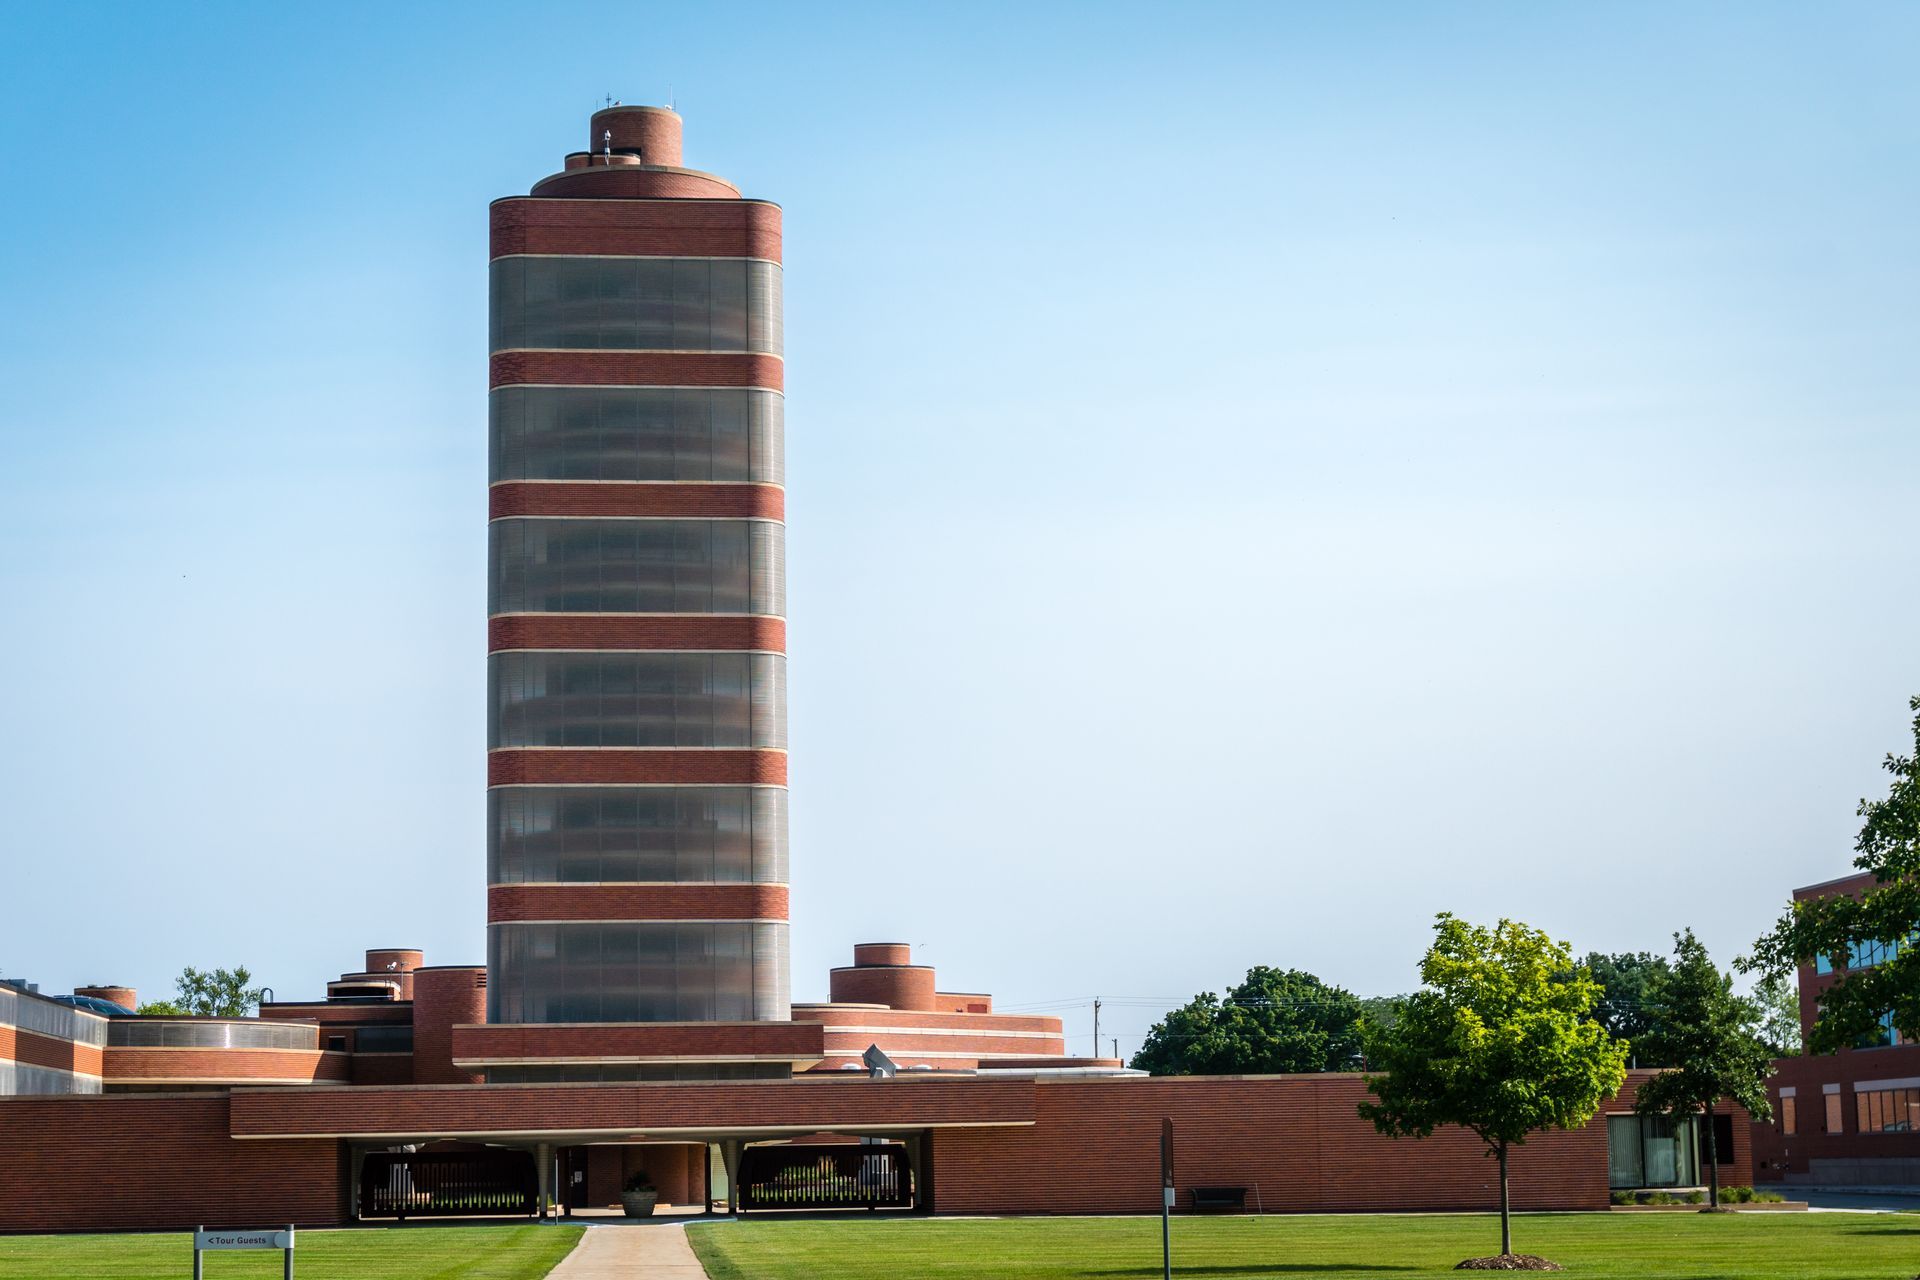 Frank Lloyd Wright Architecture in Racine, WI